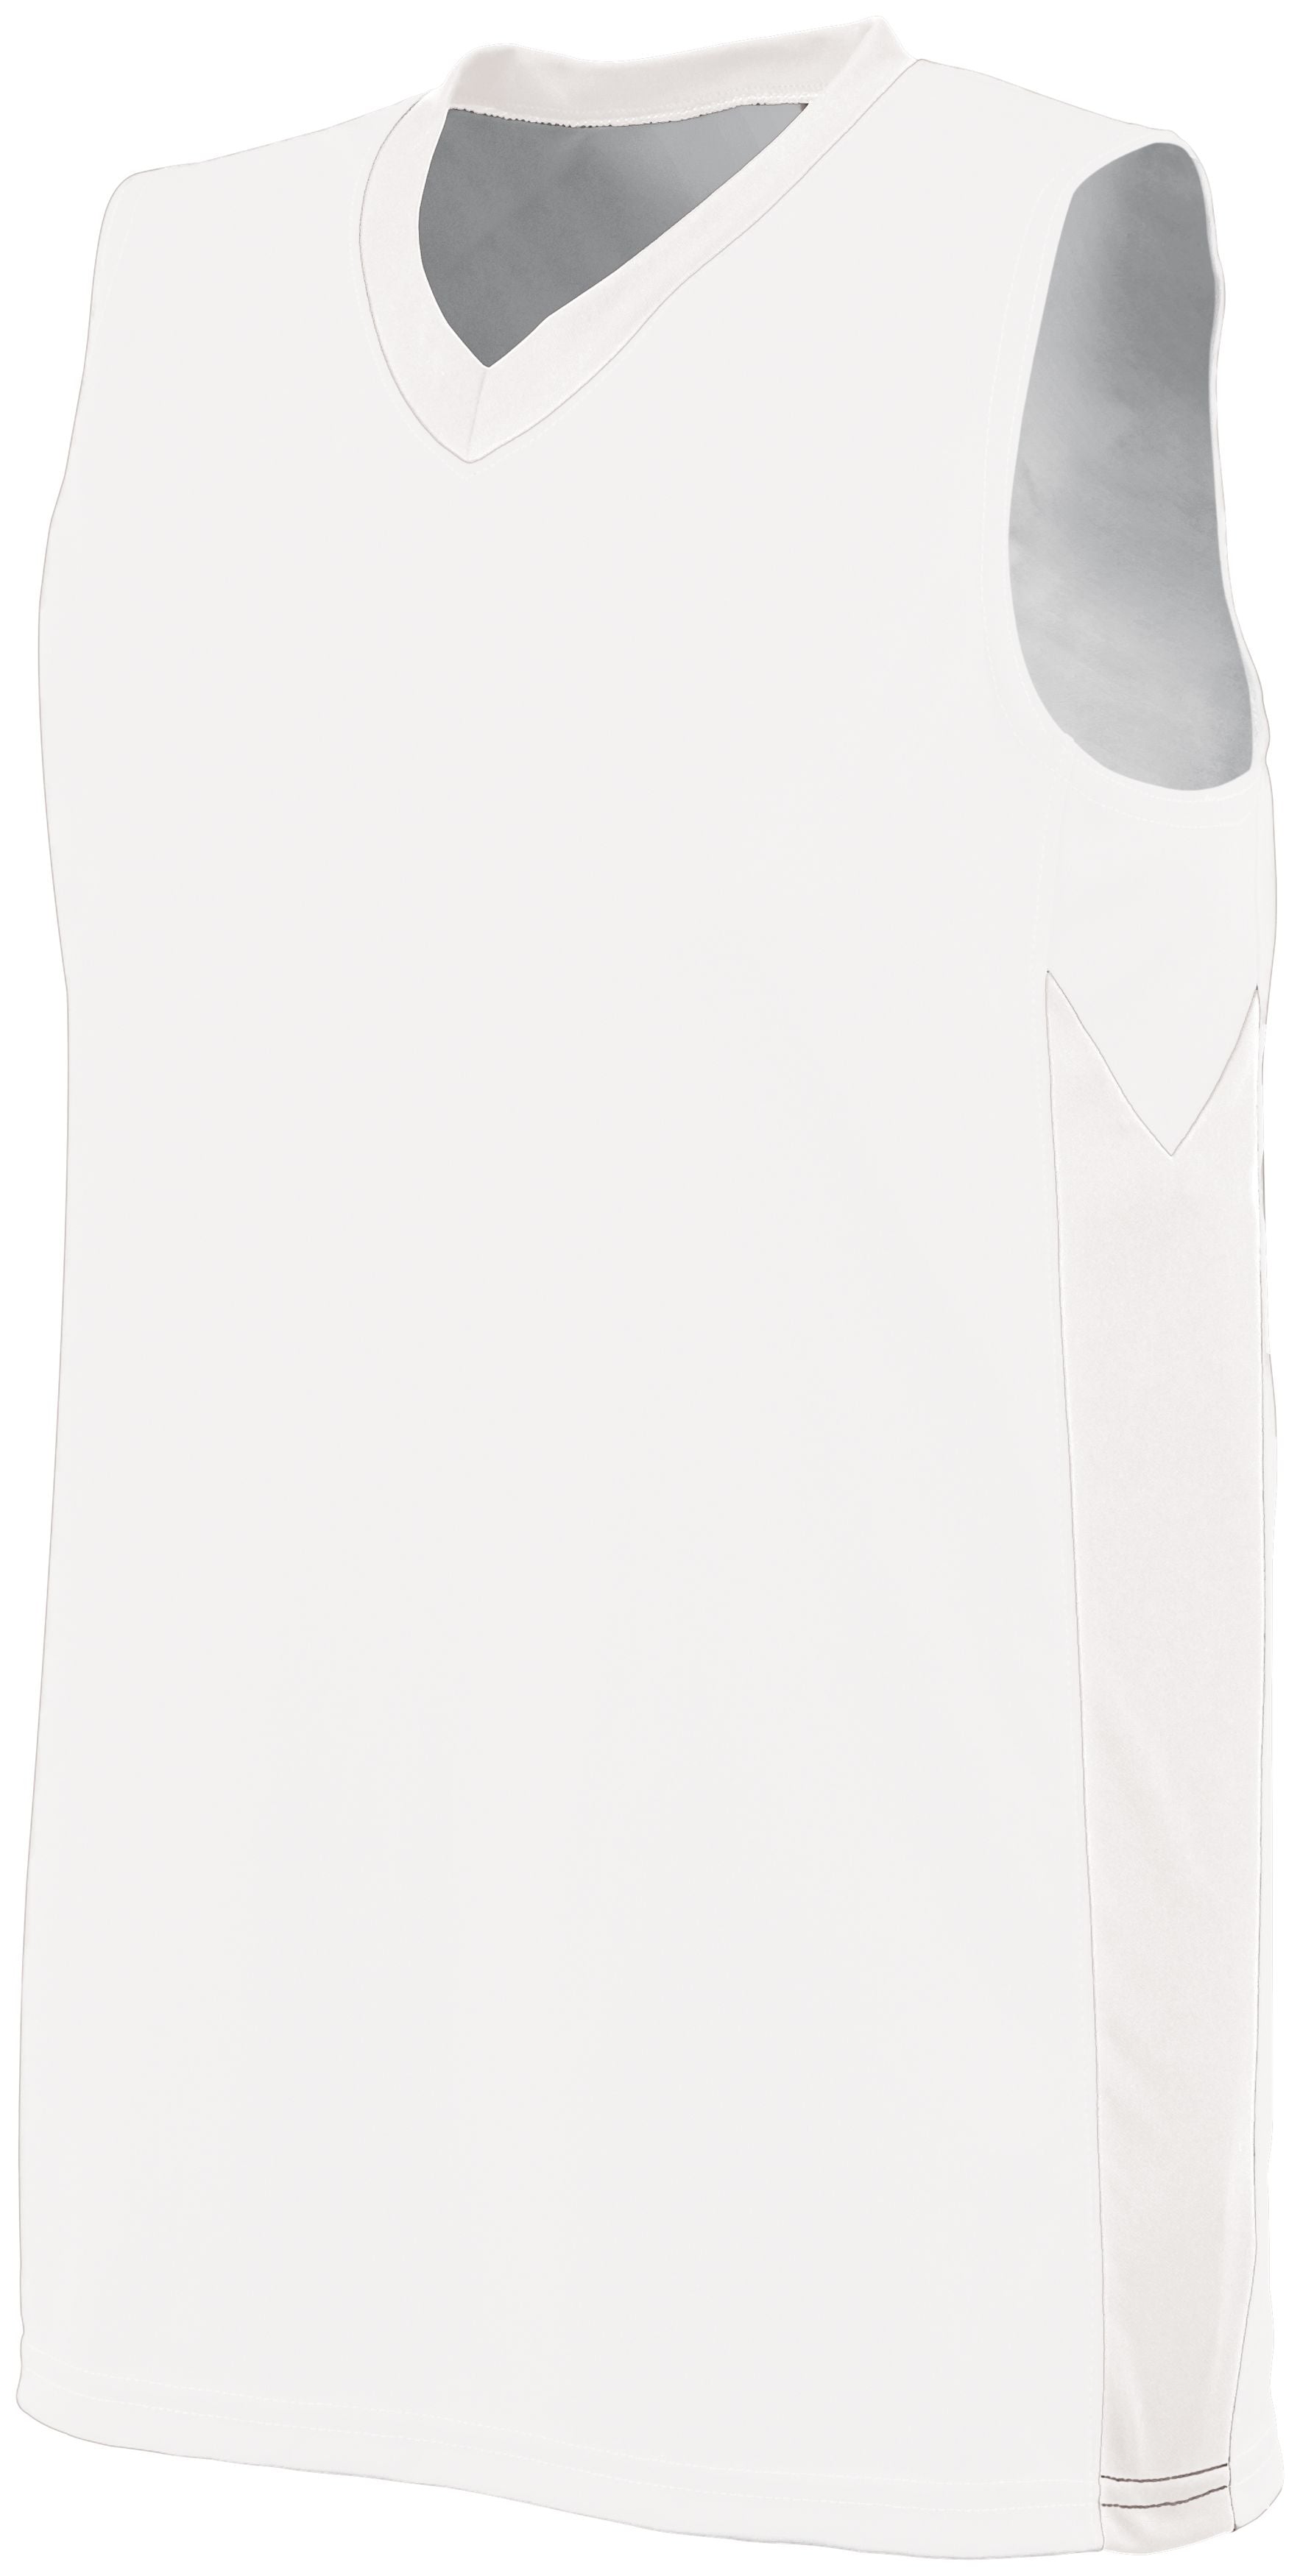 Augusta Sportswear Ladies Block Out Jersey in White/White  -Part of the Ladies, Ladies-Jersey, Augusta-Products, Basketball, Shirts, All-Sports, All-Sports-1 product lines at KanaleyCreations.com